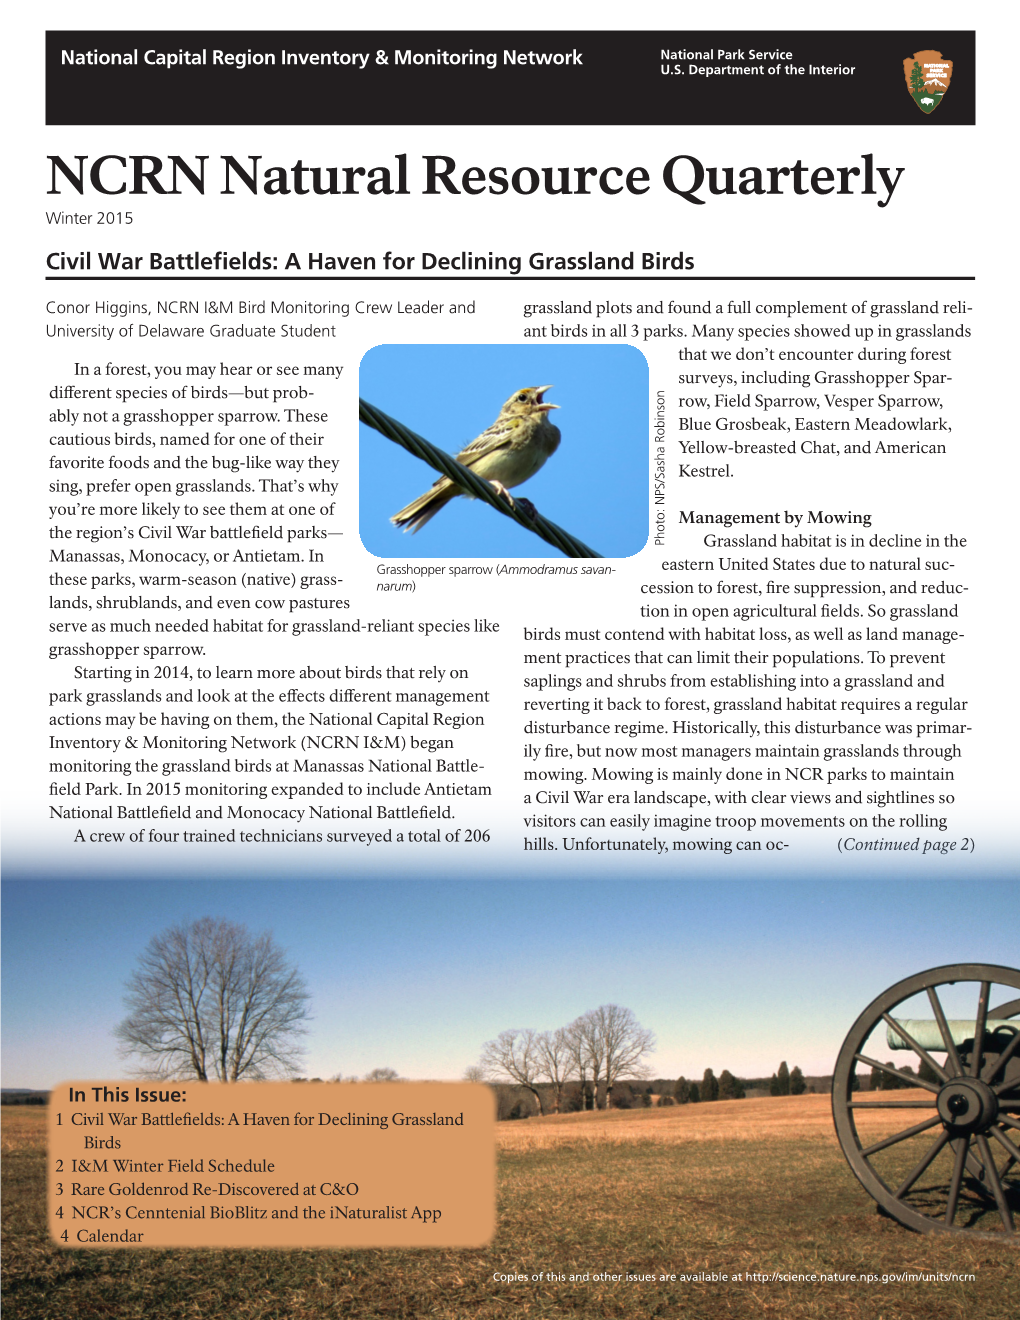 NCRN Natural Resource Quarterly Winter 2015